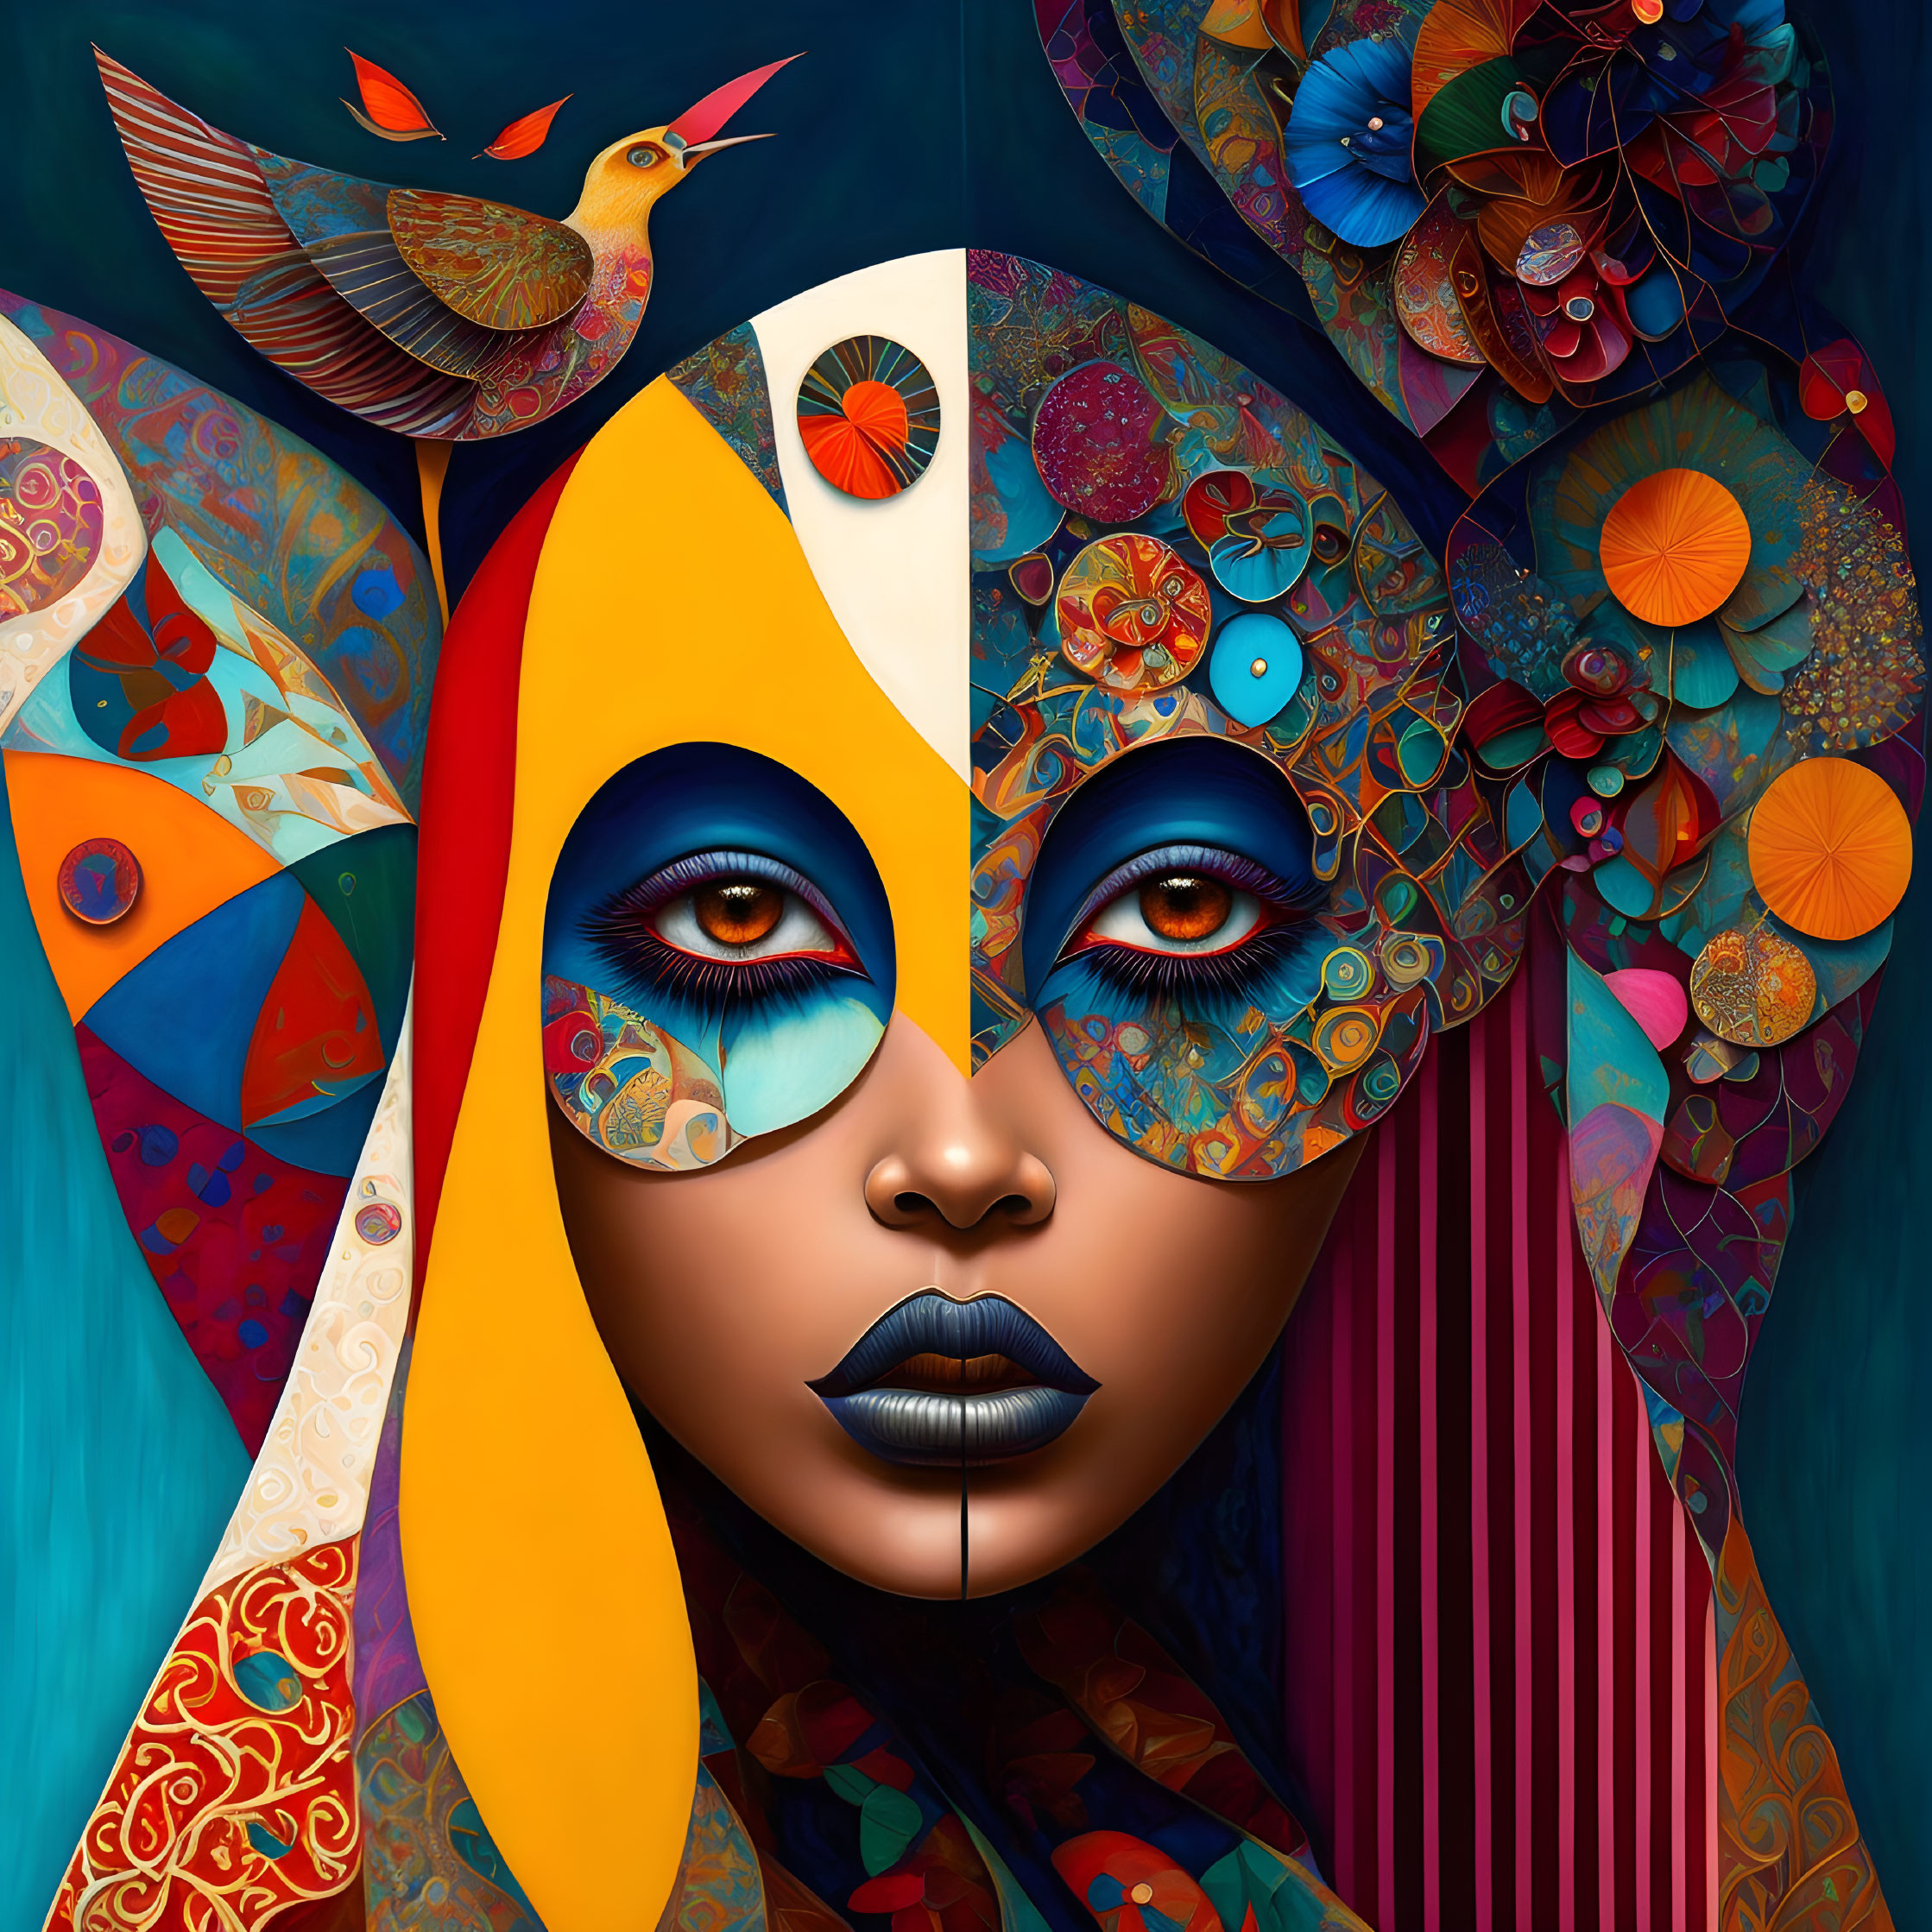 Colorful digital artwork: Woman's face with vibrant patterns and whimsical birds